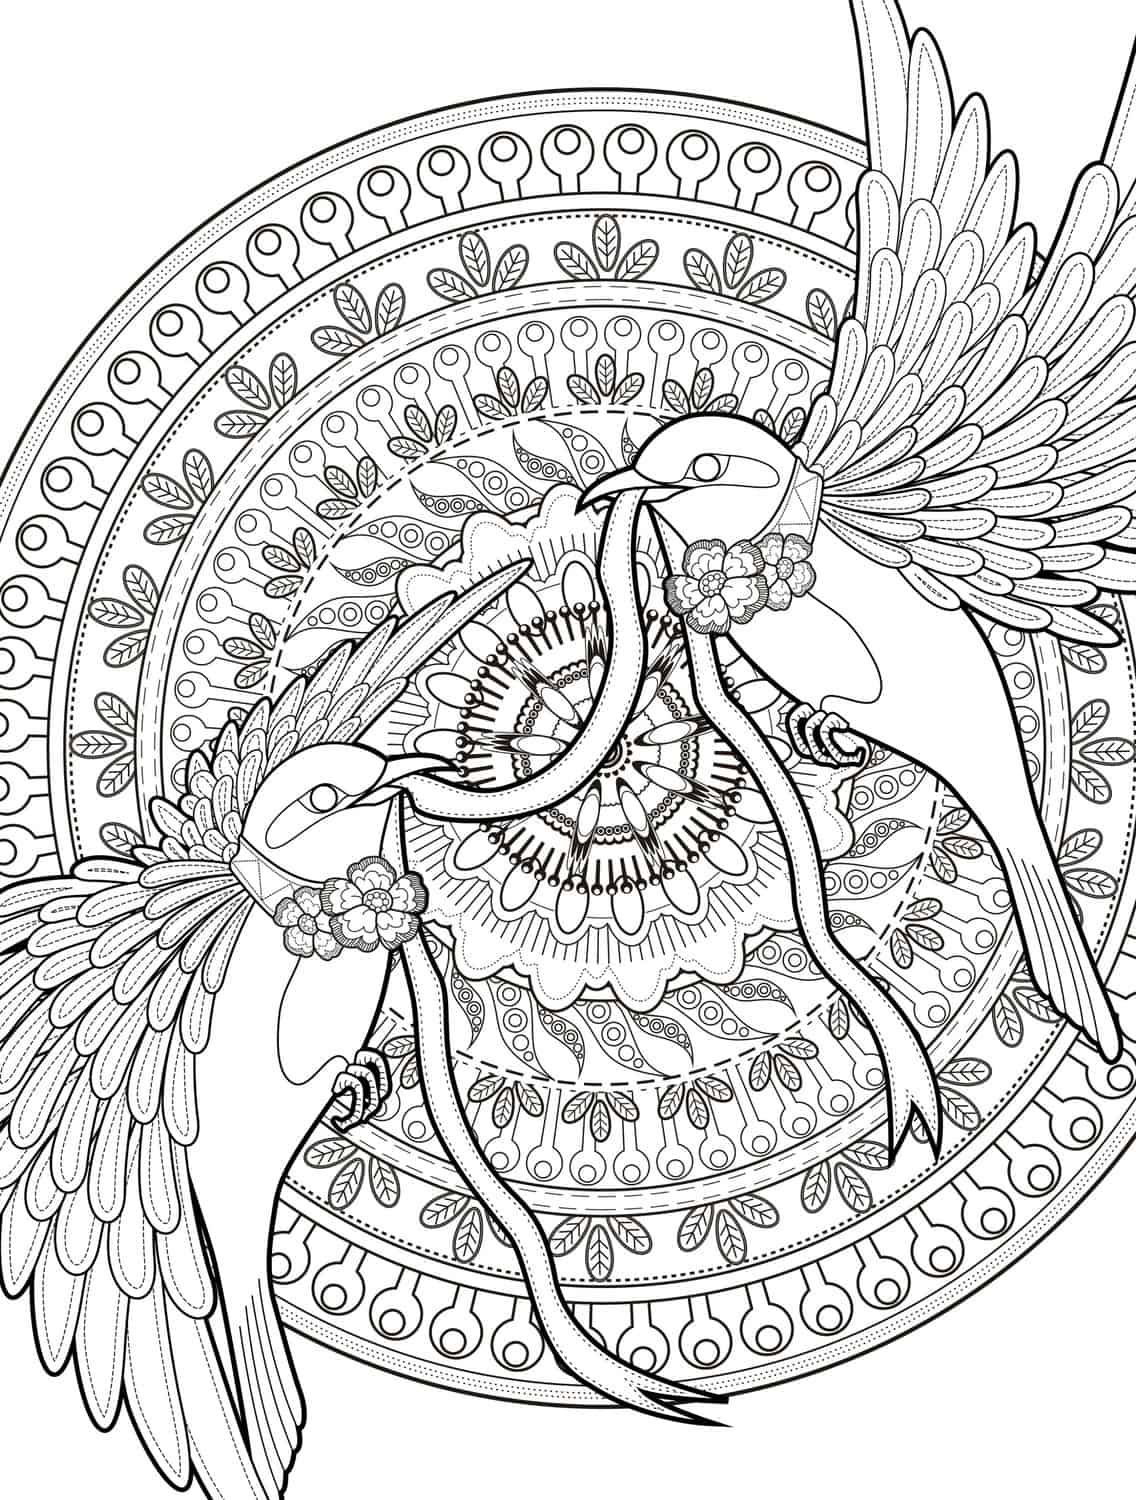 24 More Free Printable Adult Coloring Pages  Page 24 of 